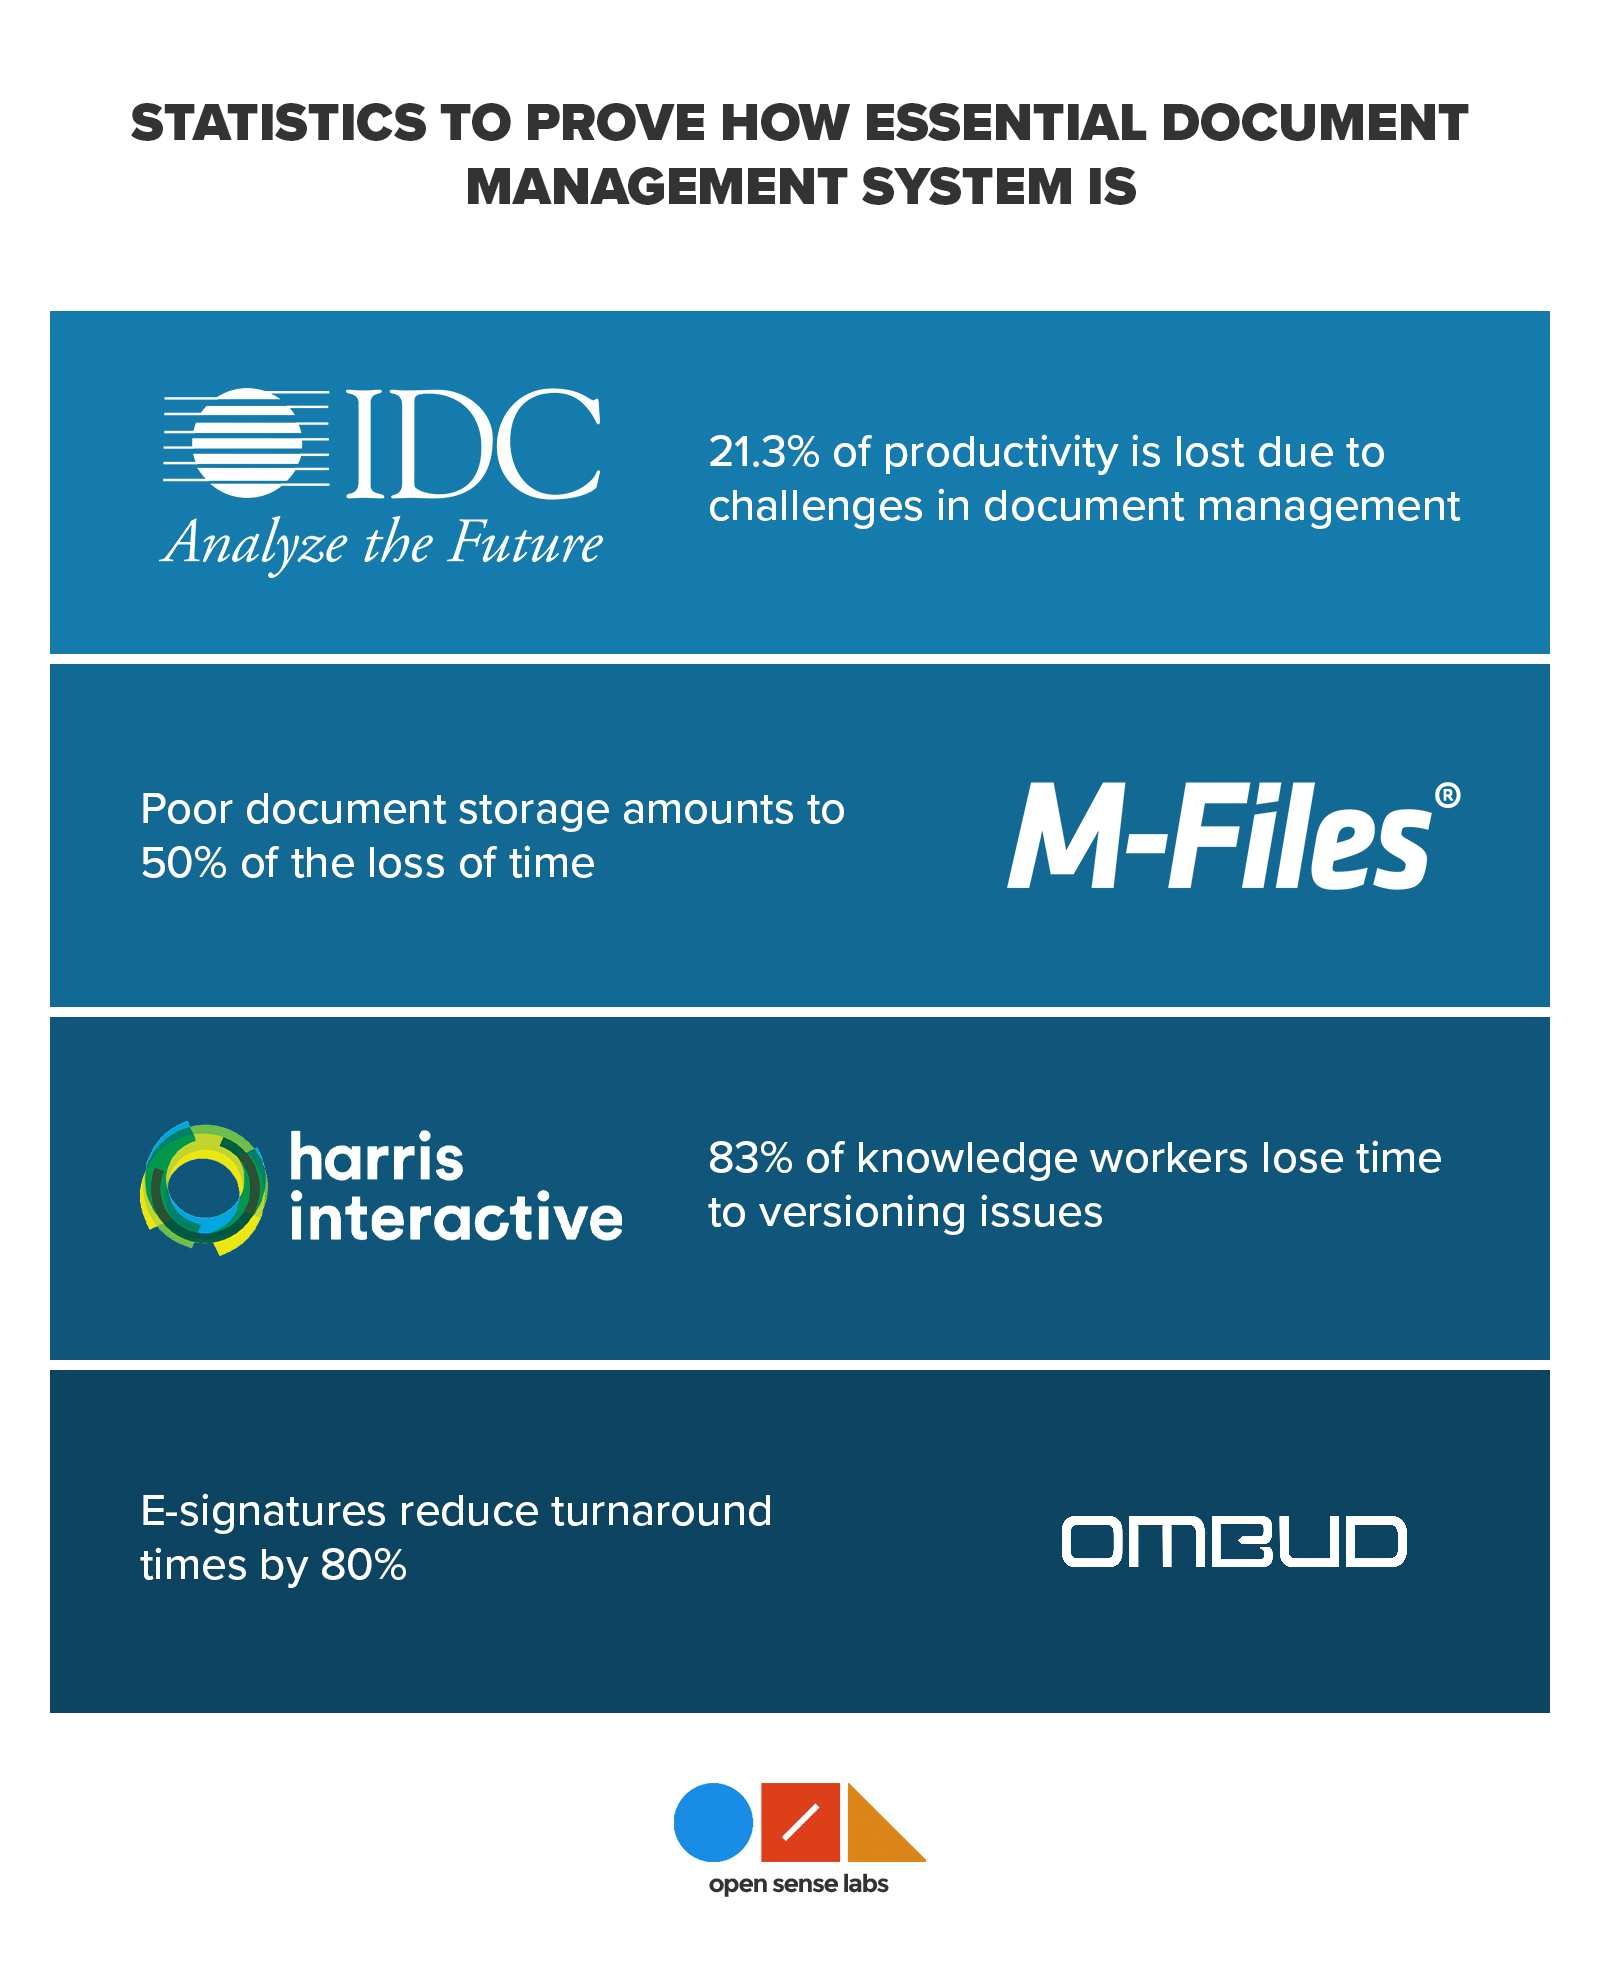 Infographics with statistical information written below the logos of IDC, M-files, Harris interactive, and Ombud